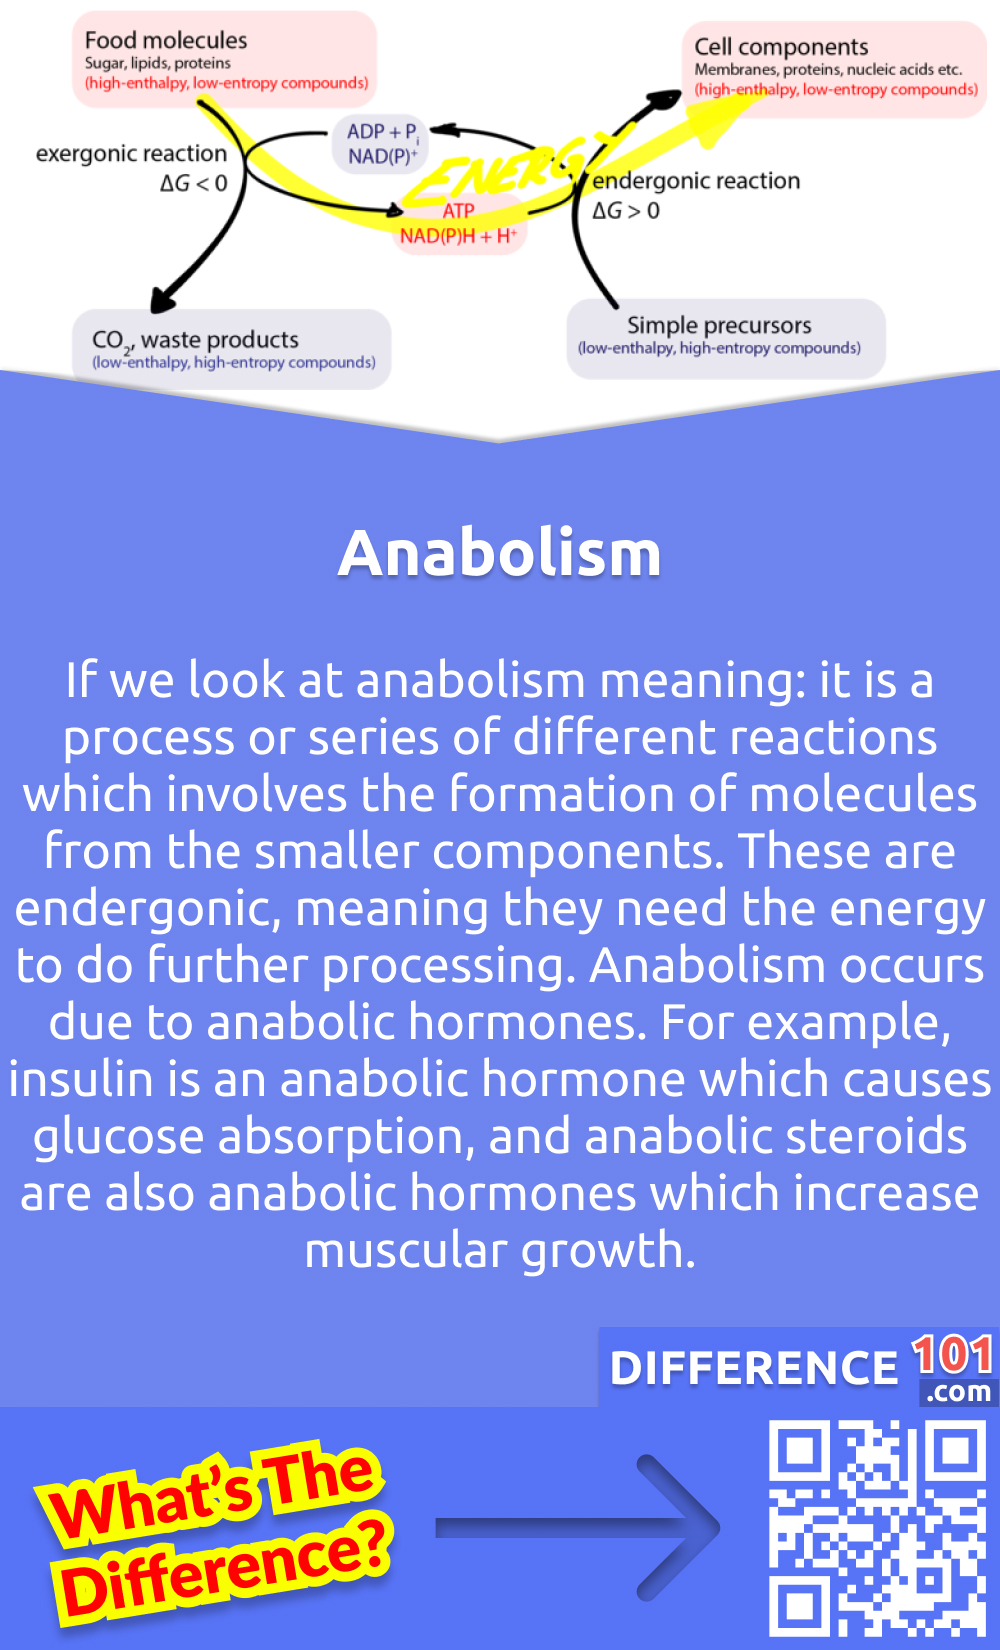 What Is Anabolism? If we look at anabolism meaning: it is a process or series of different reactions which involves the formation of molecules from the smaller components. These are endergonic, meaning they need the energy to do further processing. Anabolism occurs due to anabolic hormones. For example, insulin is an anabolic hormone which causes glucose absorption, and anabolic steroids are also anabolic hormones which increase muscular growth. Anaerobic exercises like weight lifting are anabolic activities which increase mass and muscle strength. In anabolism, kinetic energy is converted into potential, which is totally the opposite of catabolism. Preparation of dipeptides by joining amino acids together, And Combining simple sugar to synthesize disaccharides and water, are some examples of anabolism.